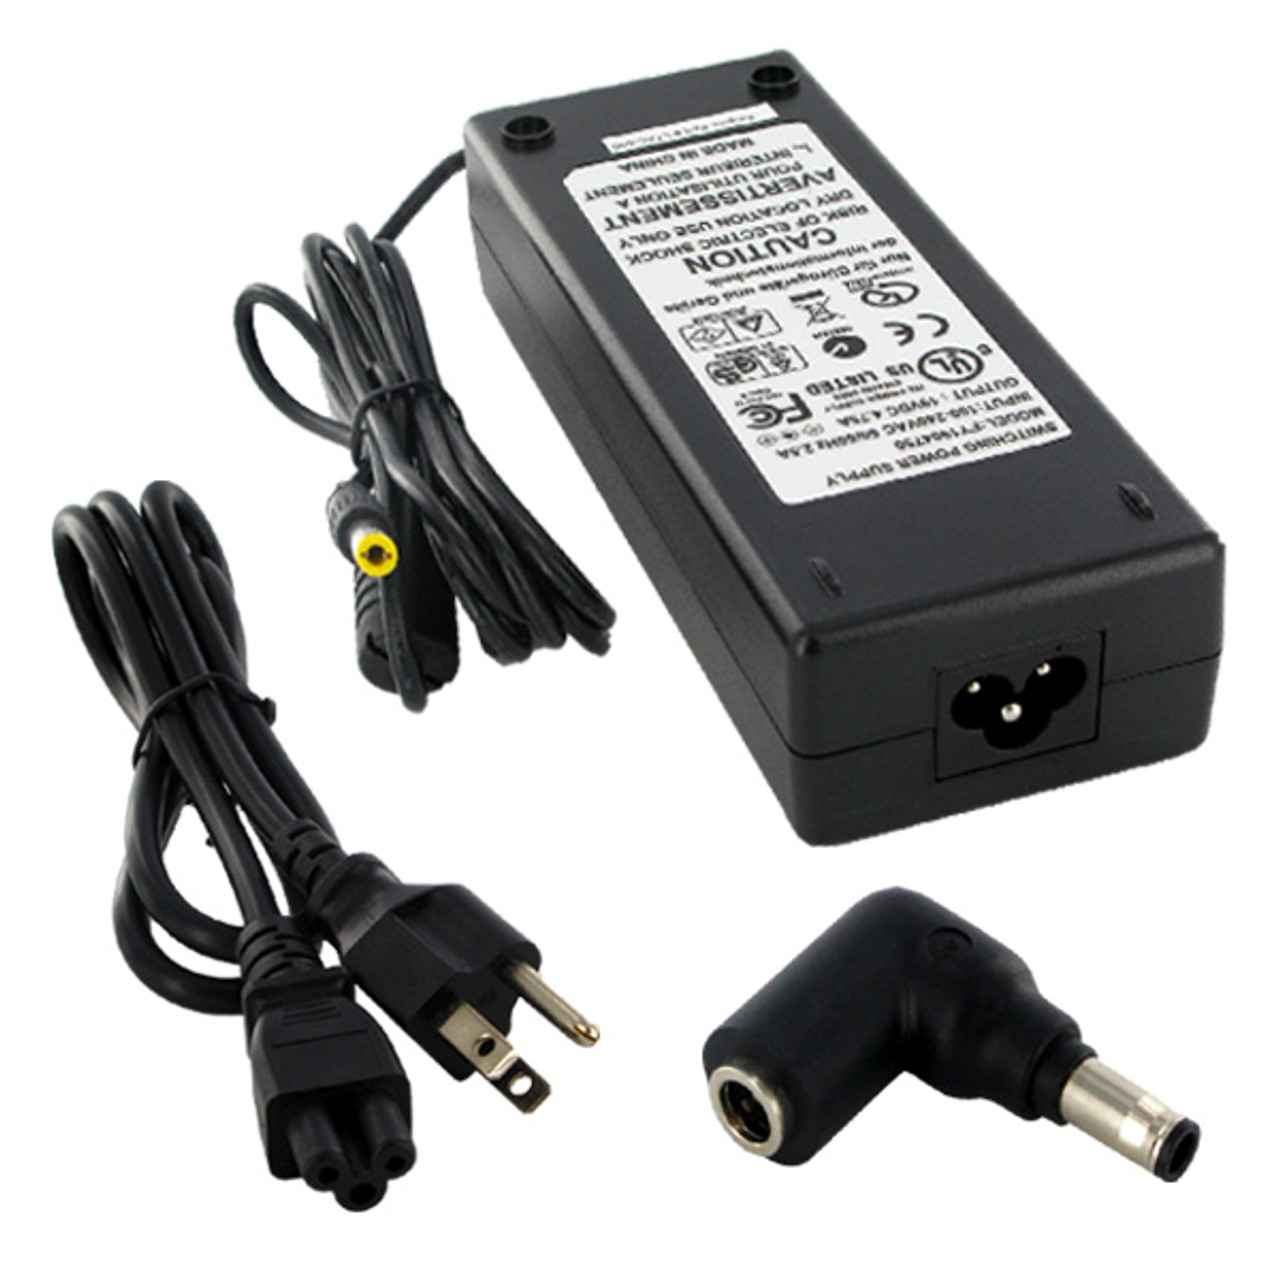 Arm ArmNote CY27 Laptop Charger BB-158991 - batterykings.com